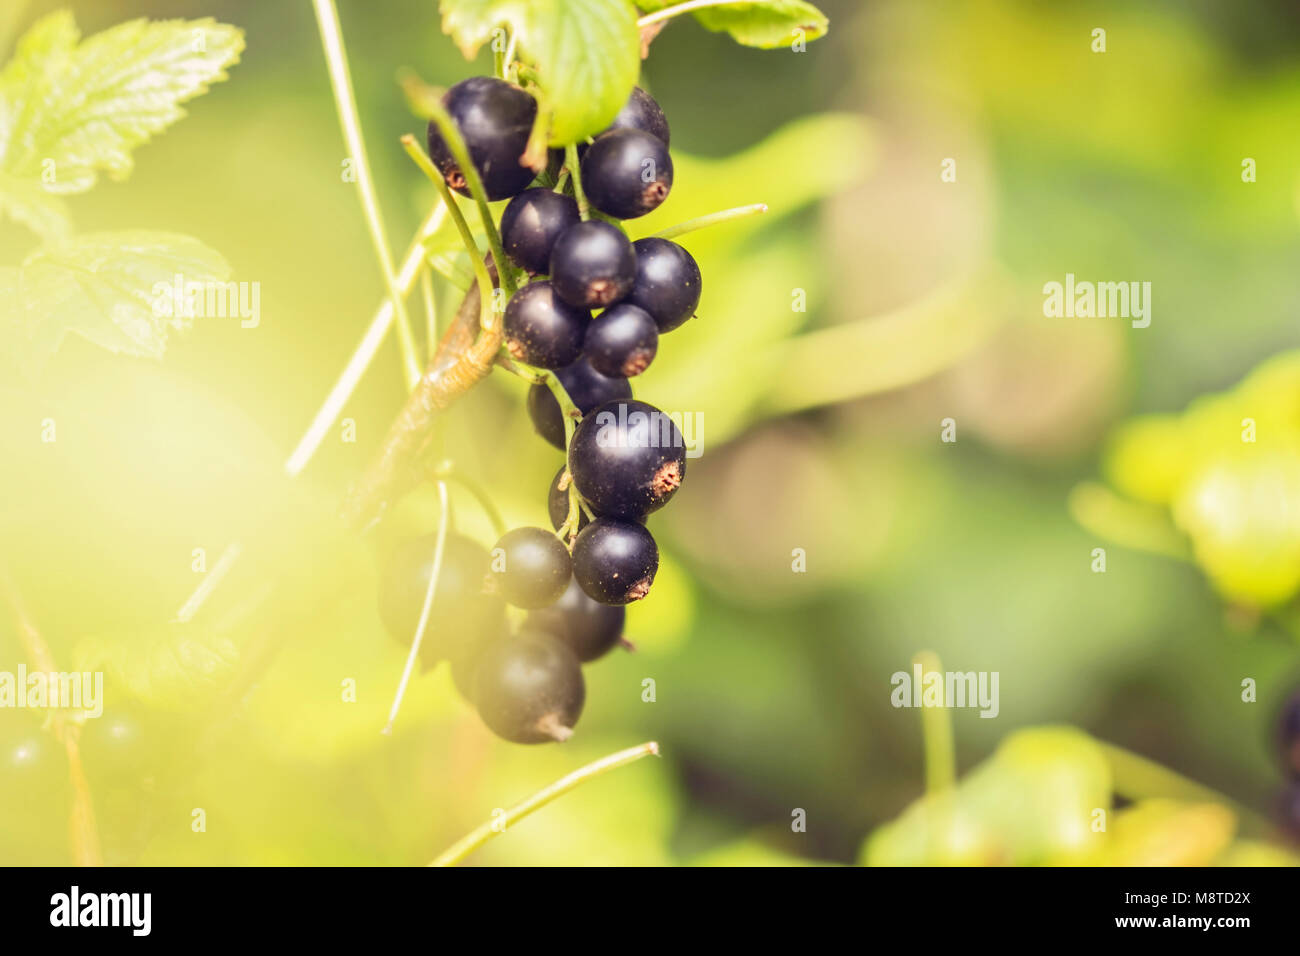 Ripe black currant on branch at summer day Stock Photo